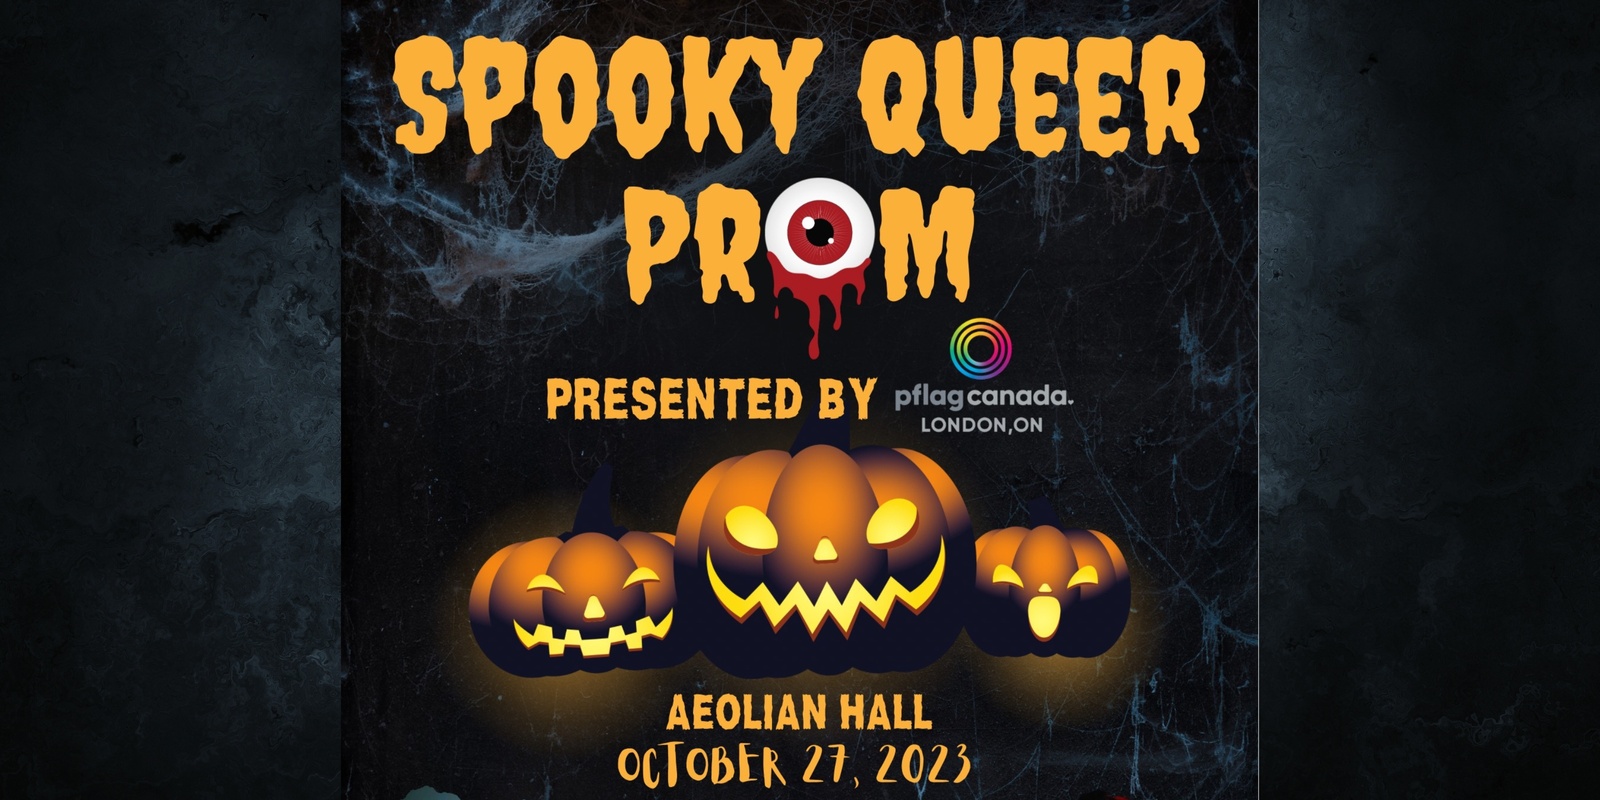 Banner image for Spooky Queer Prom (Jr. Prom - 14-18)